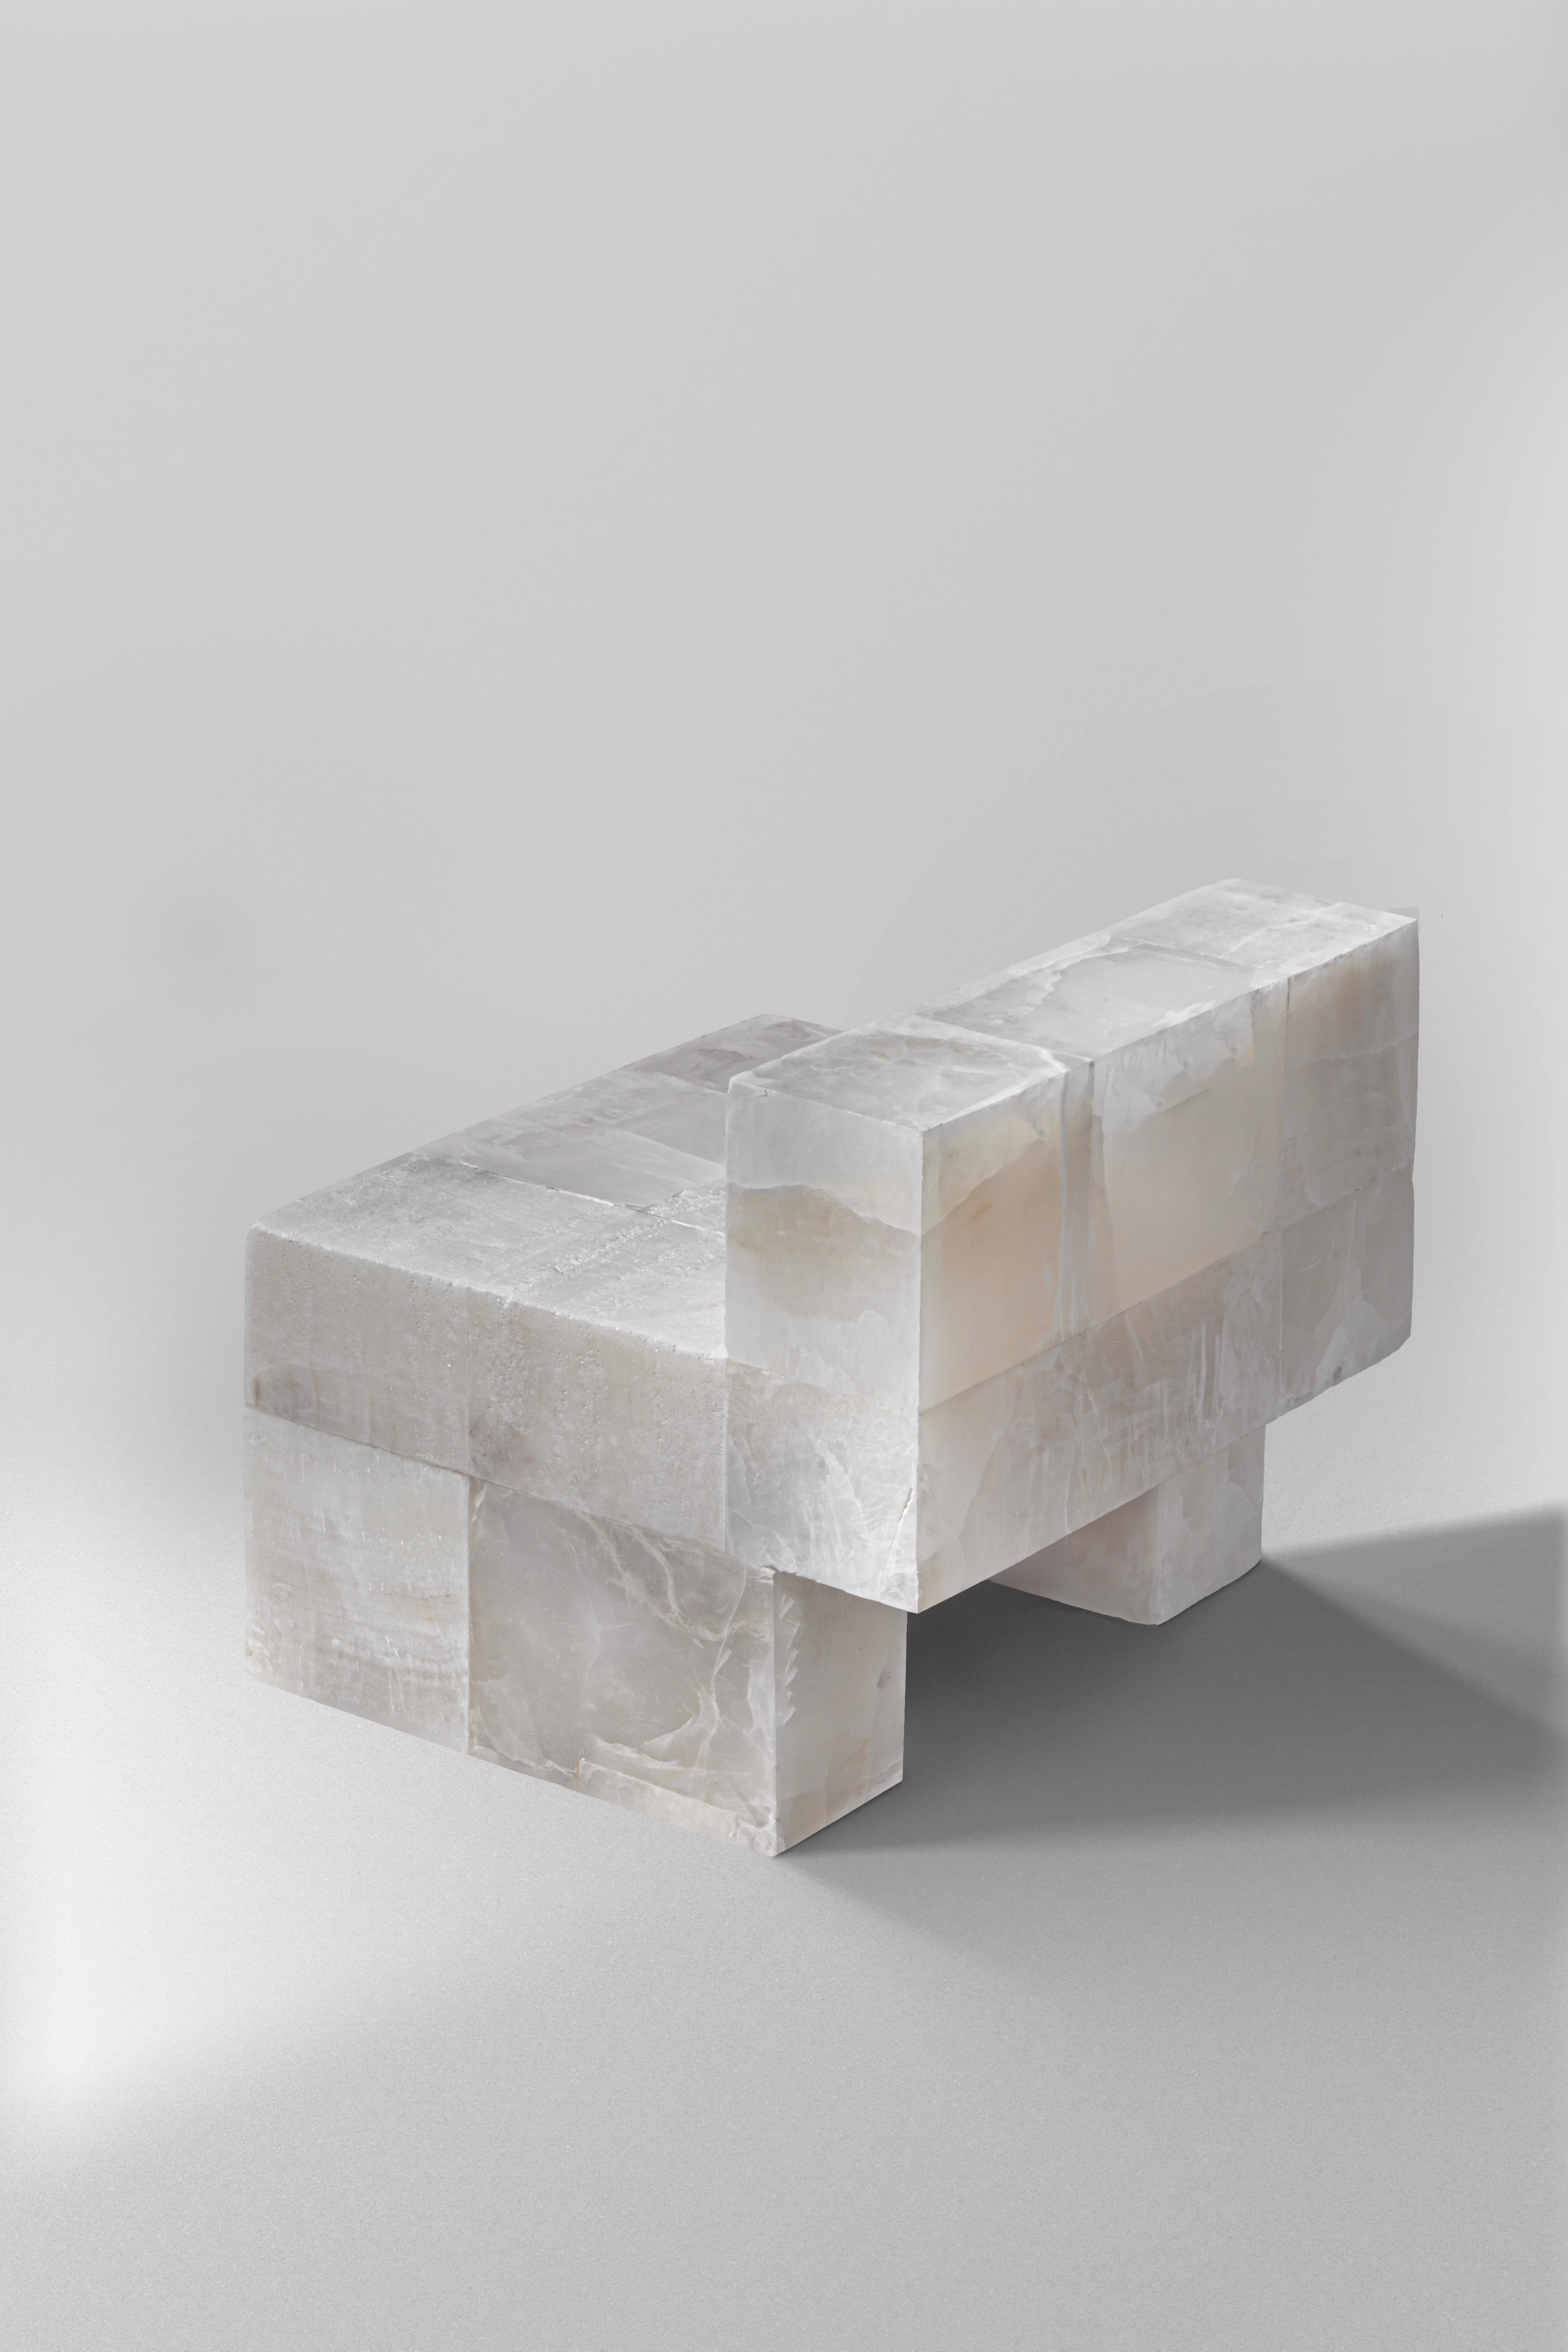 Other White Onyx Sugar Daddy Chair by Pietro Franceschini For Sale